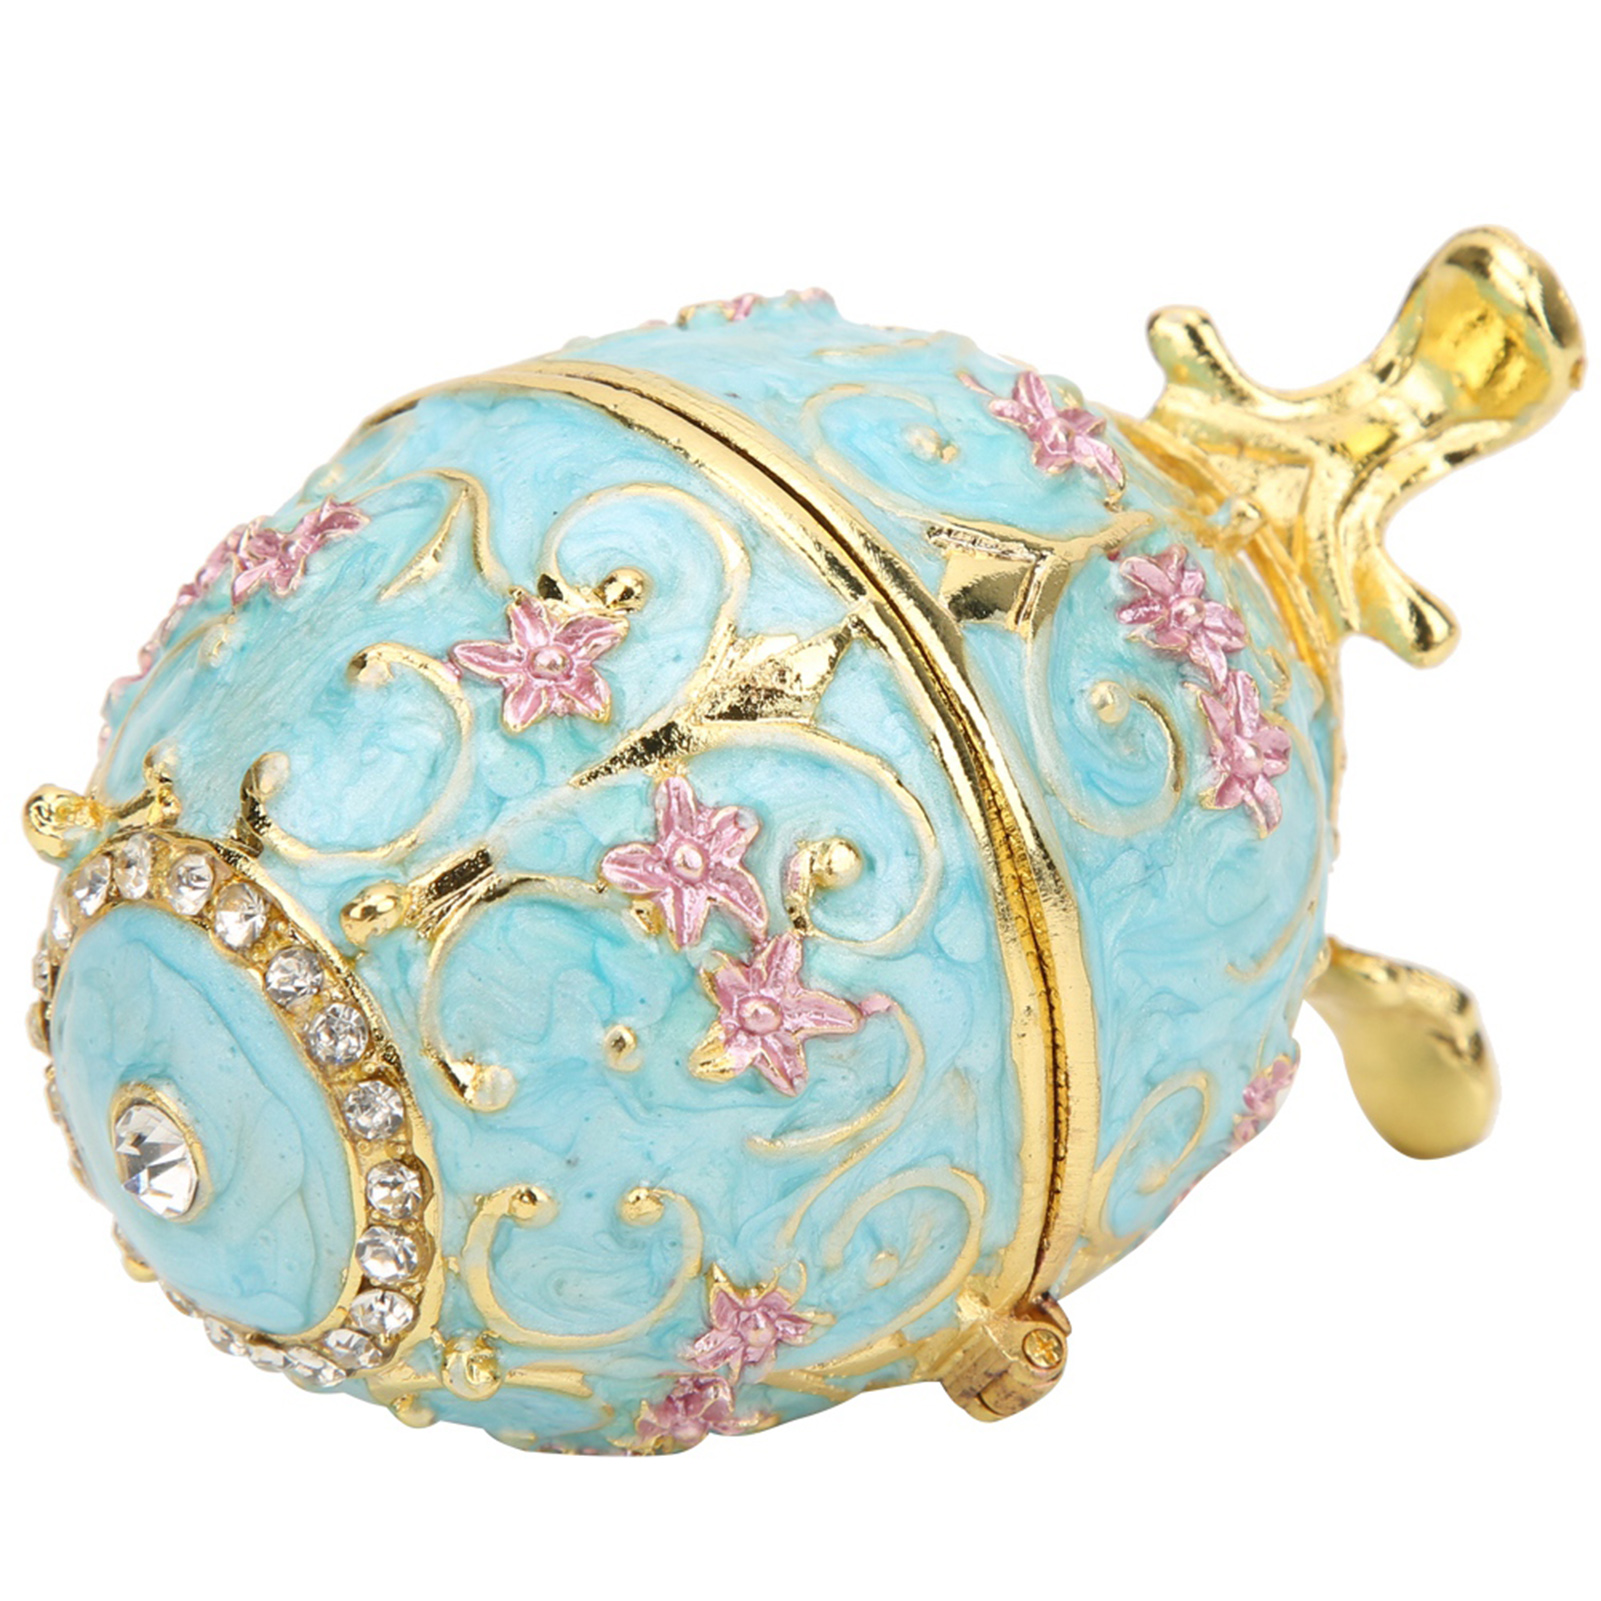 Faberge Egg, Decorative Hand-made Enameled Easter Egg Box, Metal For Women Home Ornaments Desktop Decor Gifts - image 4 of 8